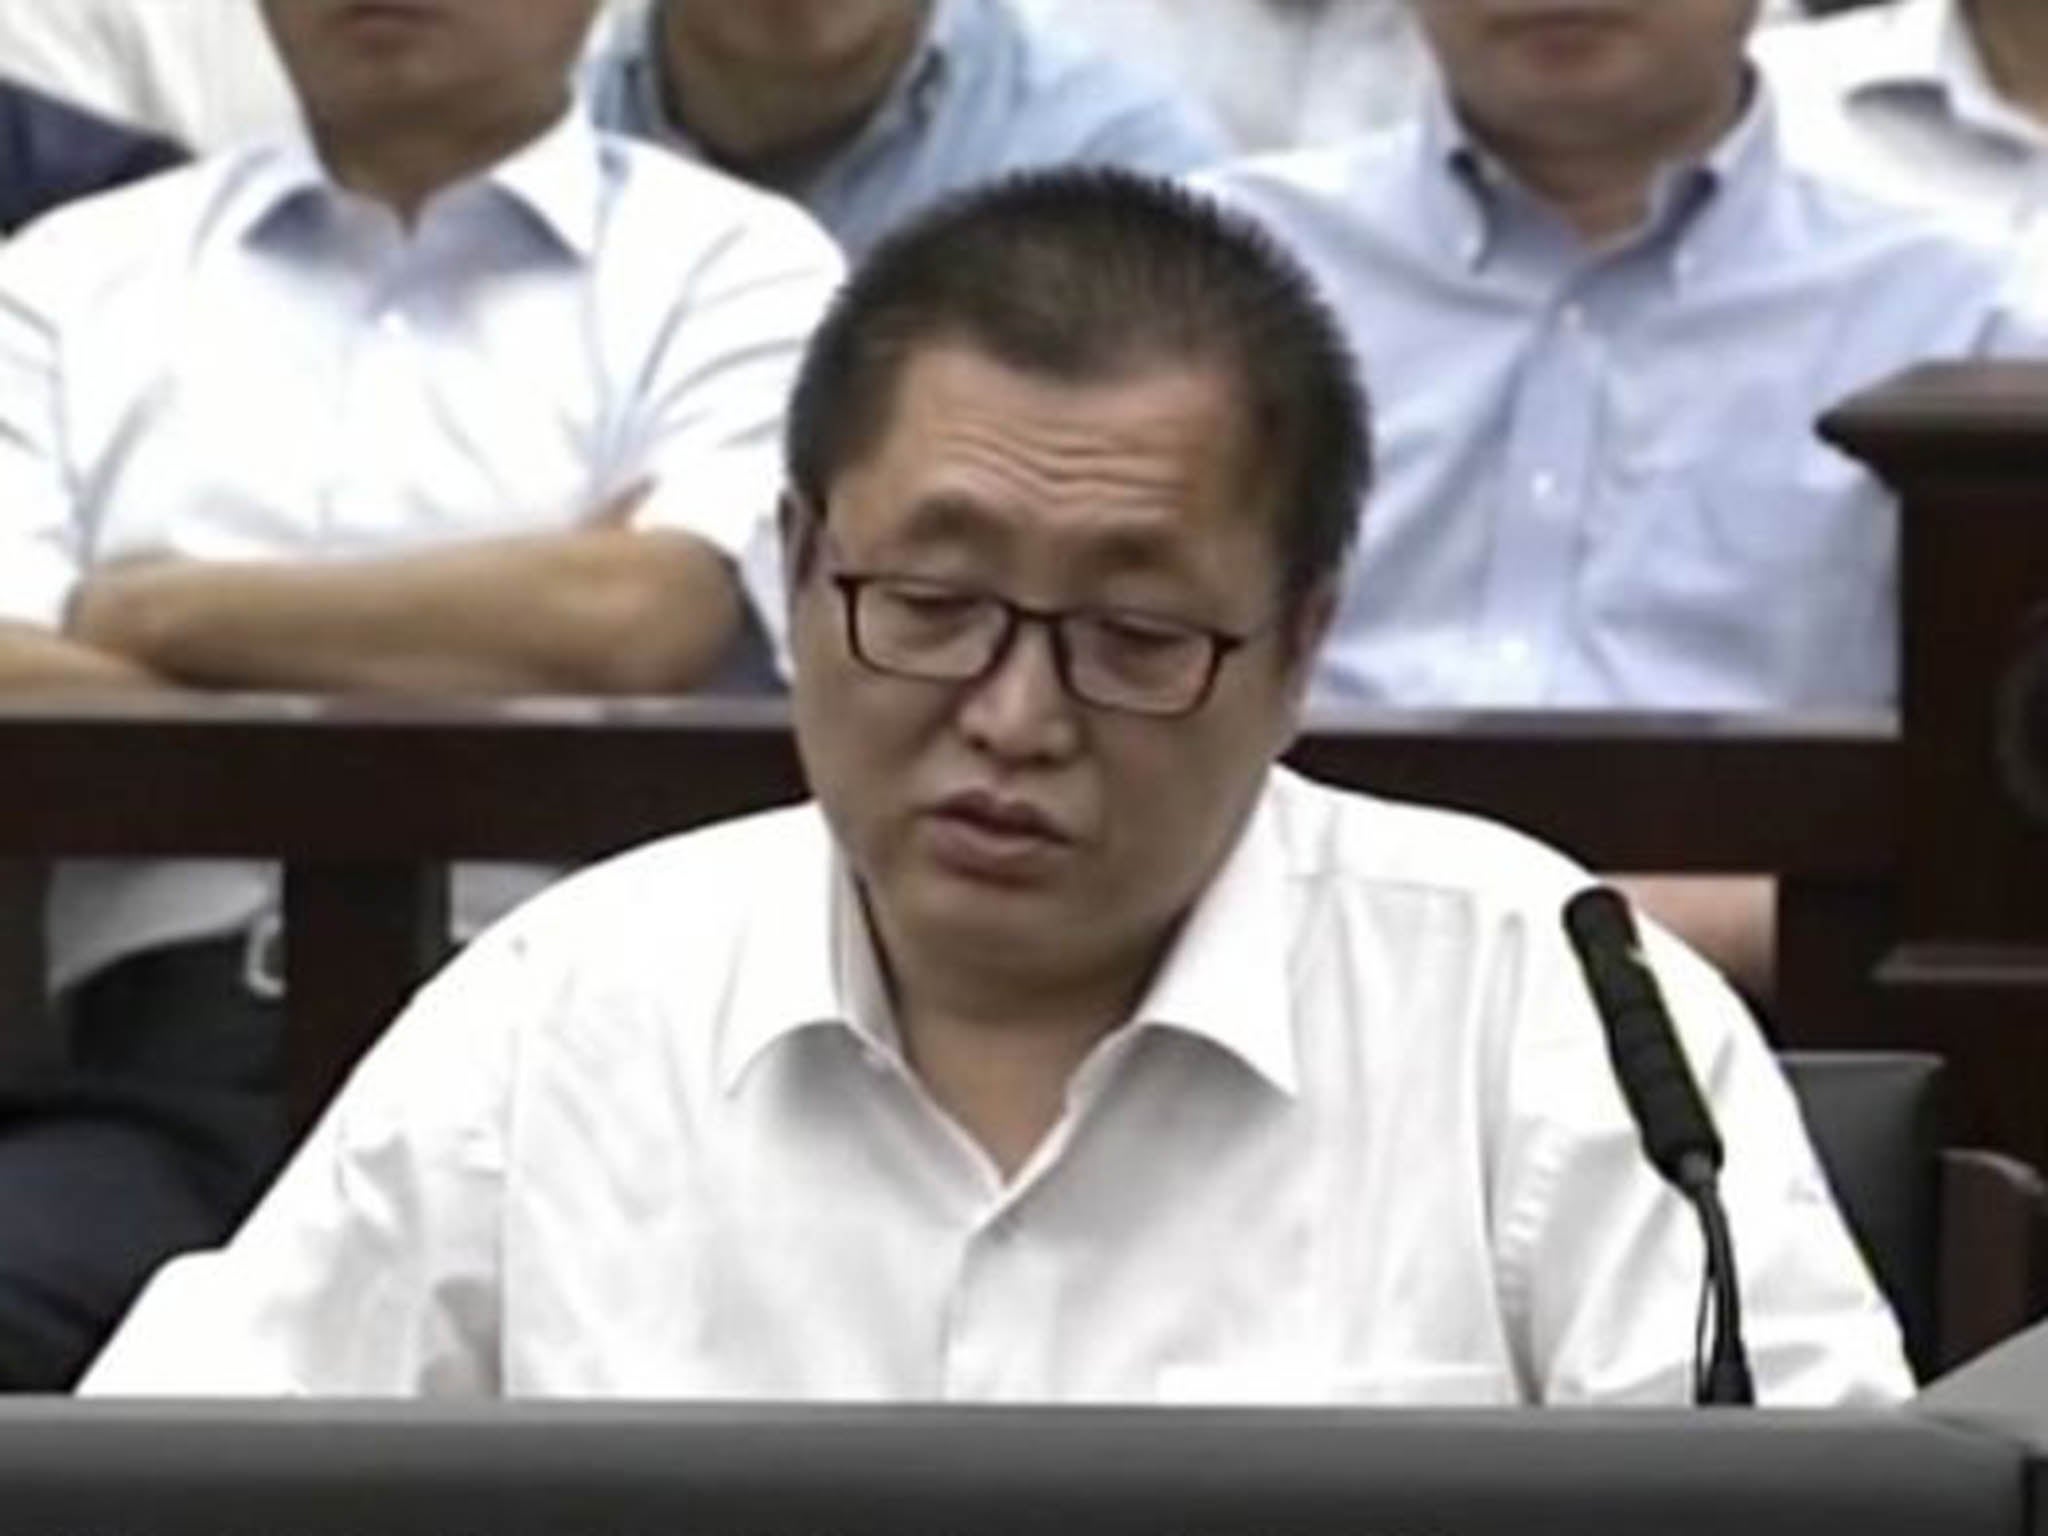 Zhai Yanmin speaks during his trial at the Tianjin No. 2 Intermediate People's Court in northern China's Tianjin Municipality